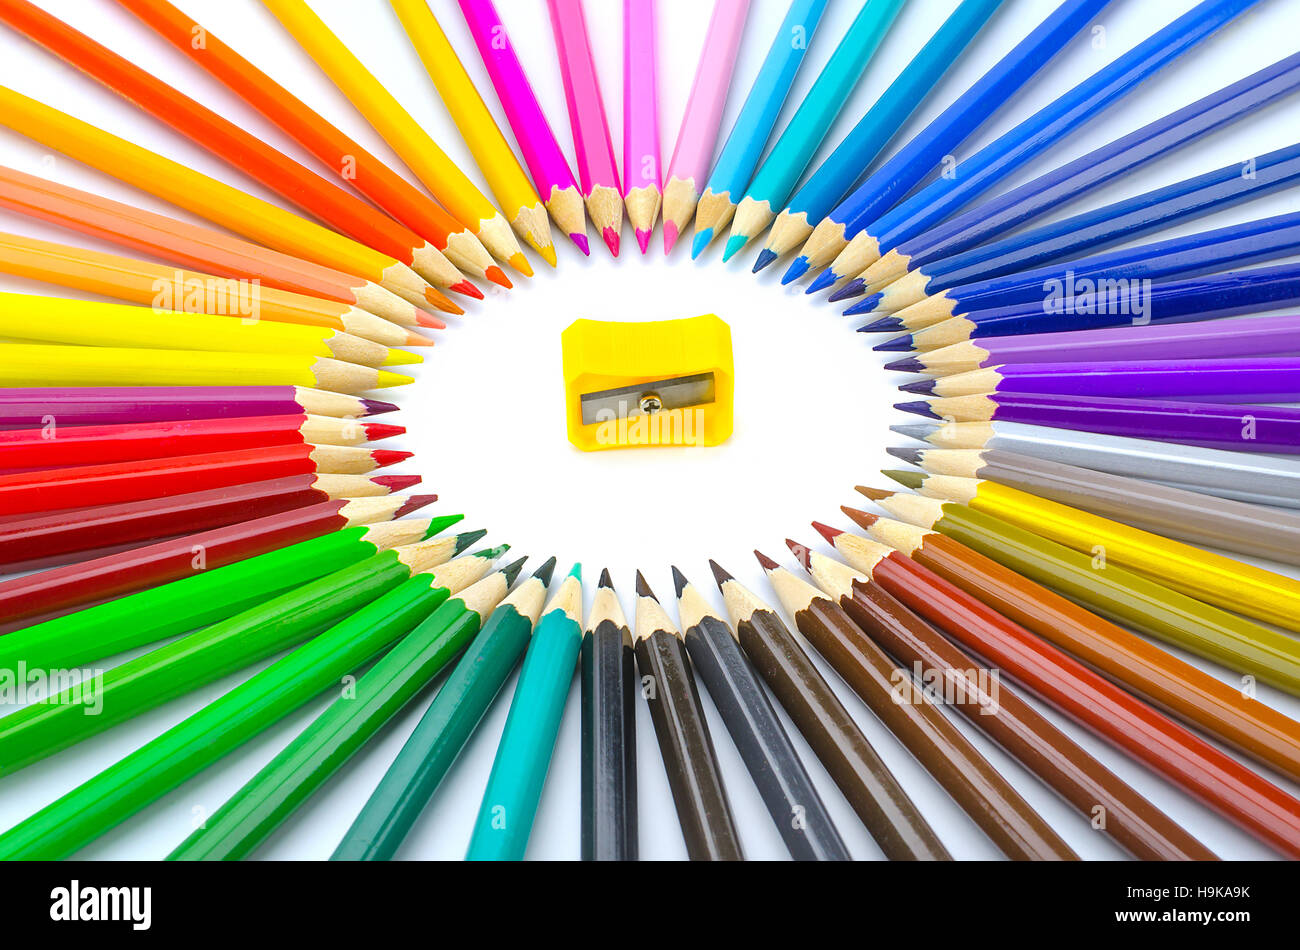 Color Pencils and Sharpeners. Stock Photo